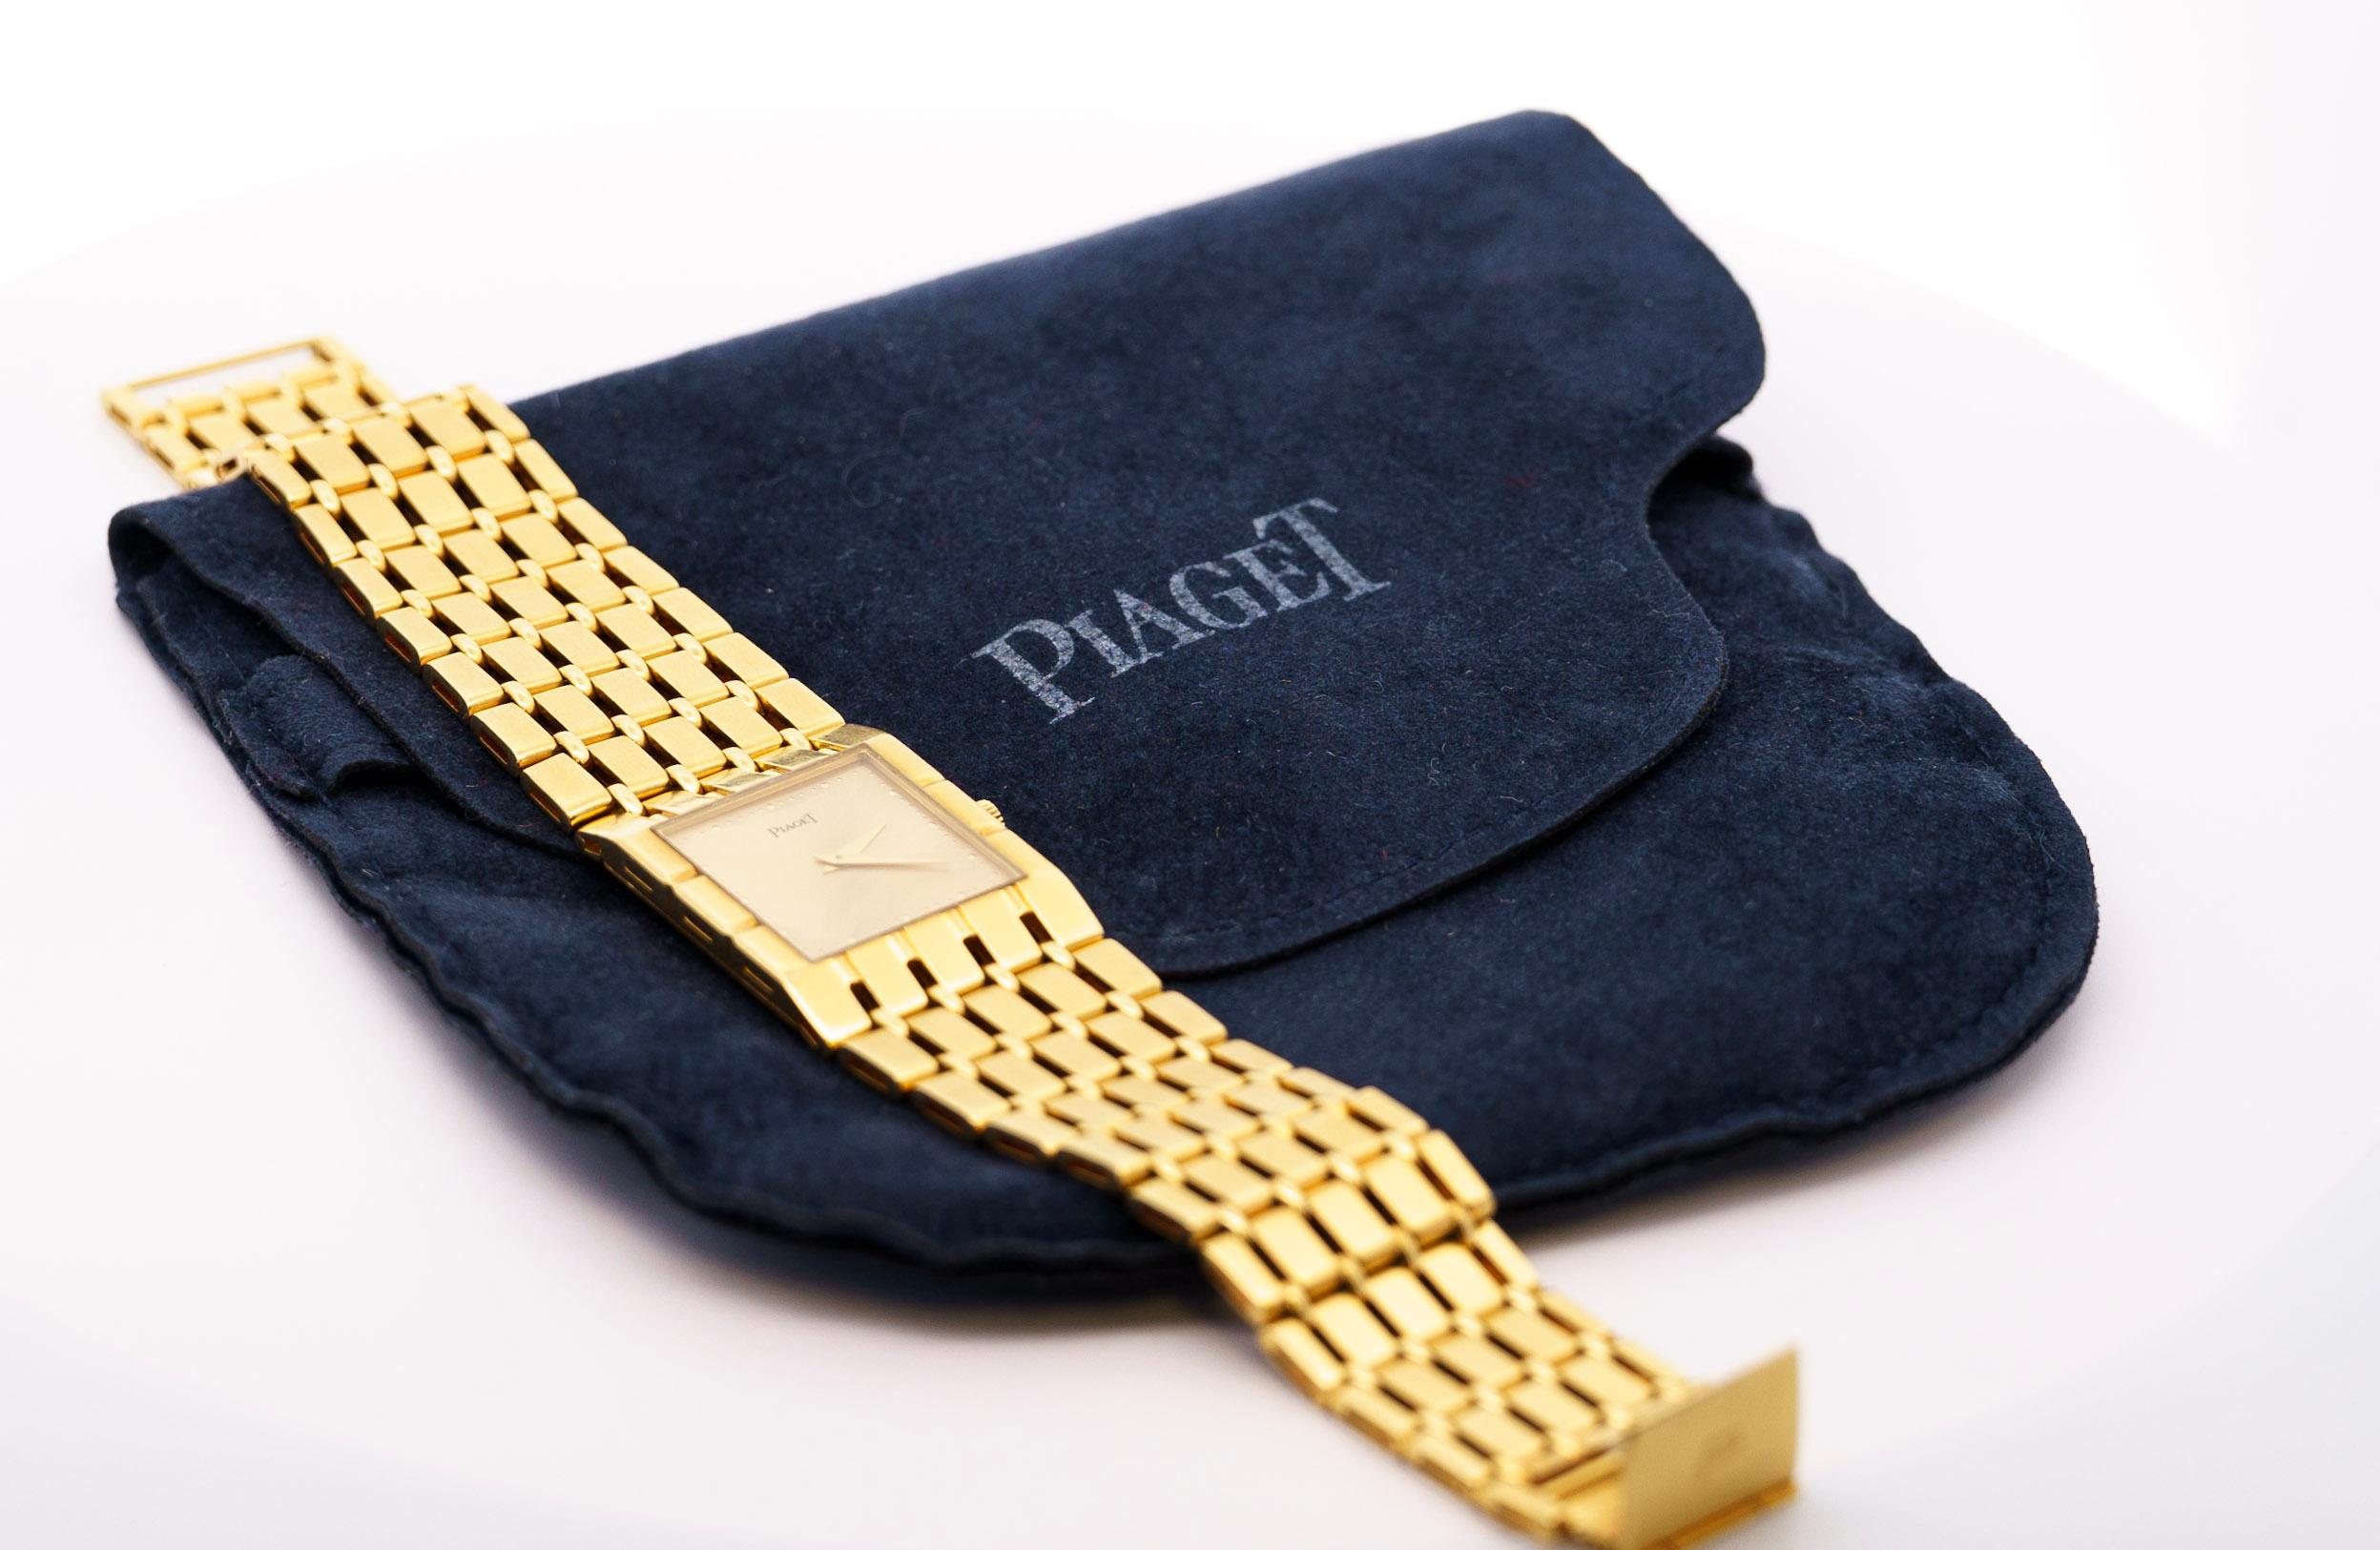 Vintage Piaget Polo 18k yellow gold unisex wristwatch, reference 9131 K51, with automatic movement, a gold face, dotted border, and a five-row link bracelet. Maker's mark and hallmark on the case back, marked 750, and a maker's mark on the fold-over